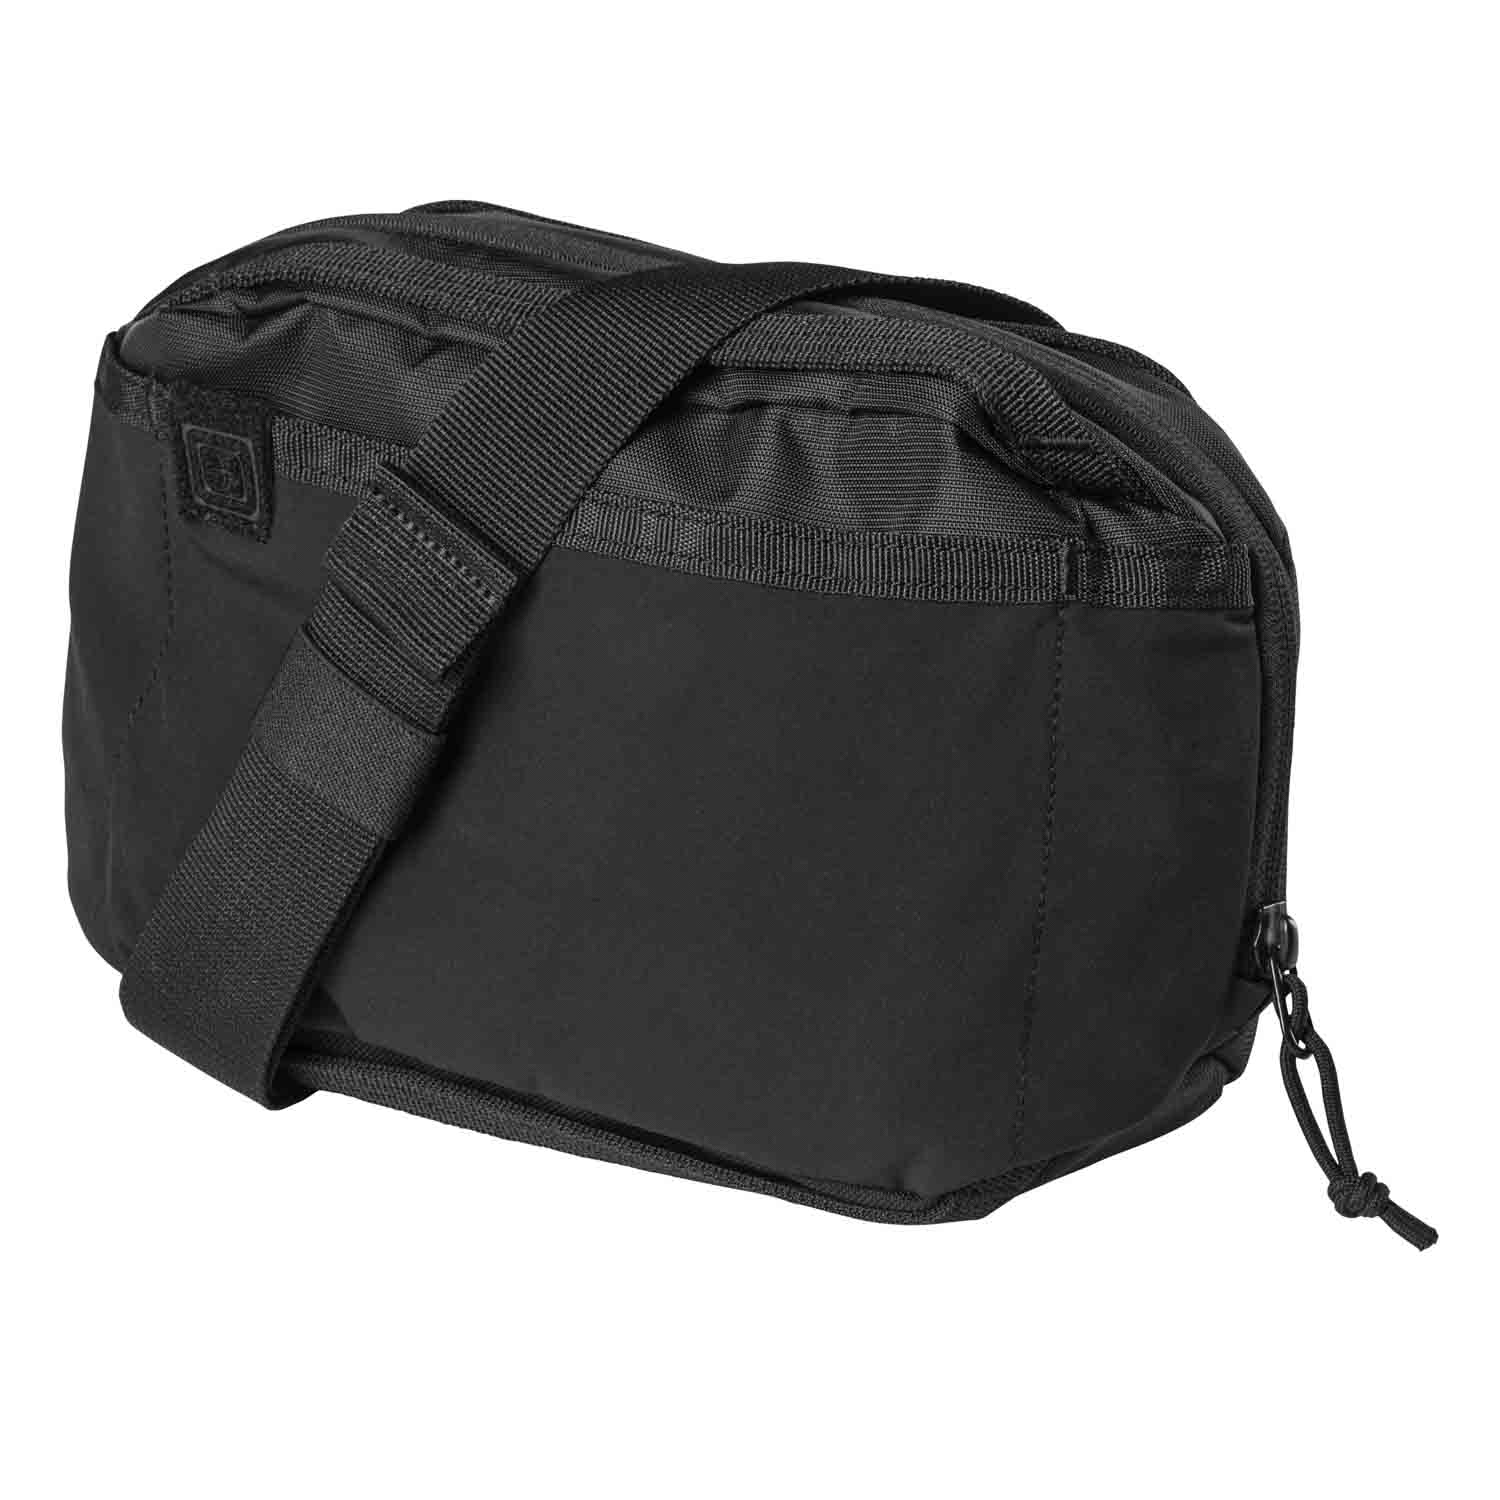 5.11 TACTICAL EMERGENCY READY POUCH (3 LITER)